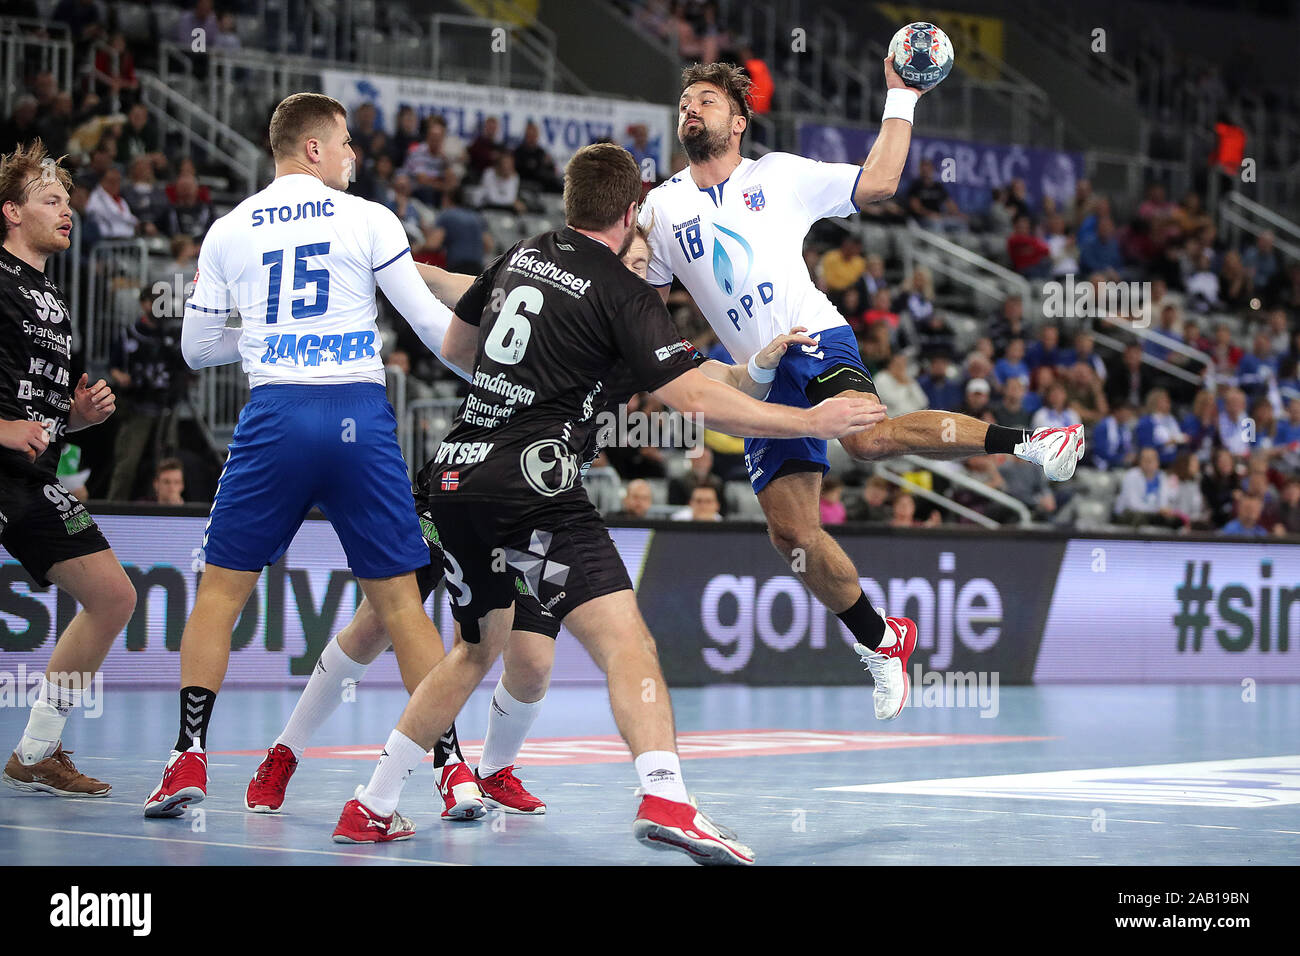 Velux Ehf Champions League High Resolution Stock Photography and Images -  Alamy